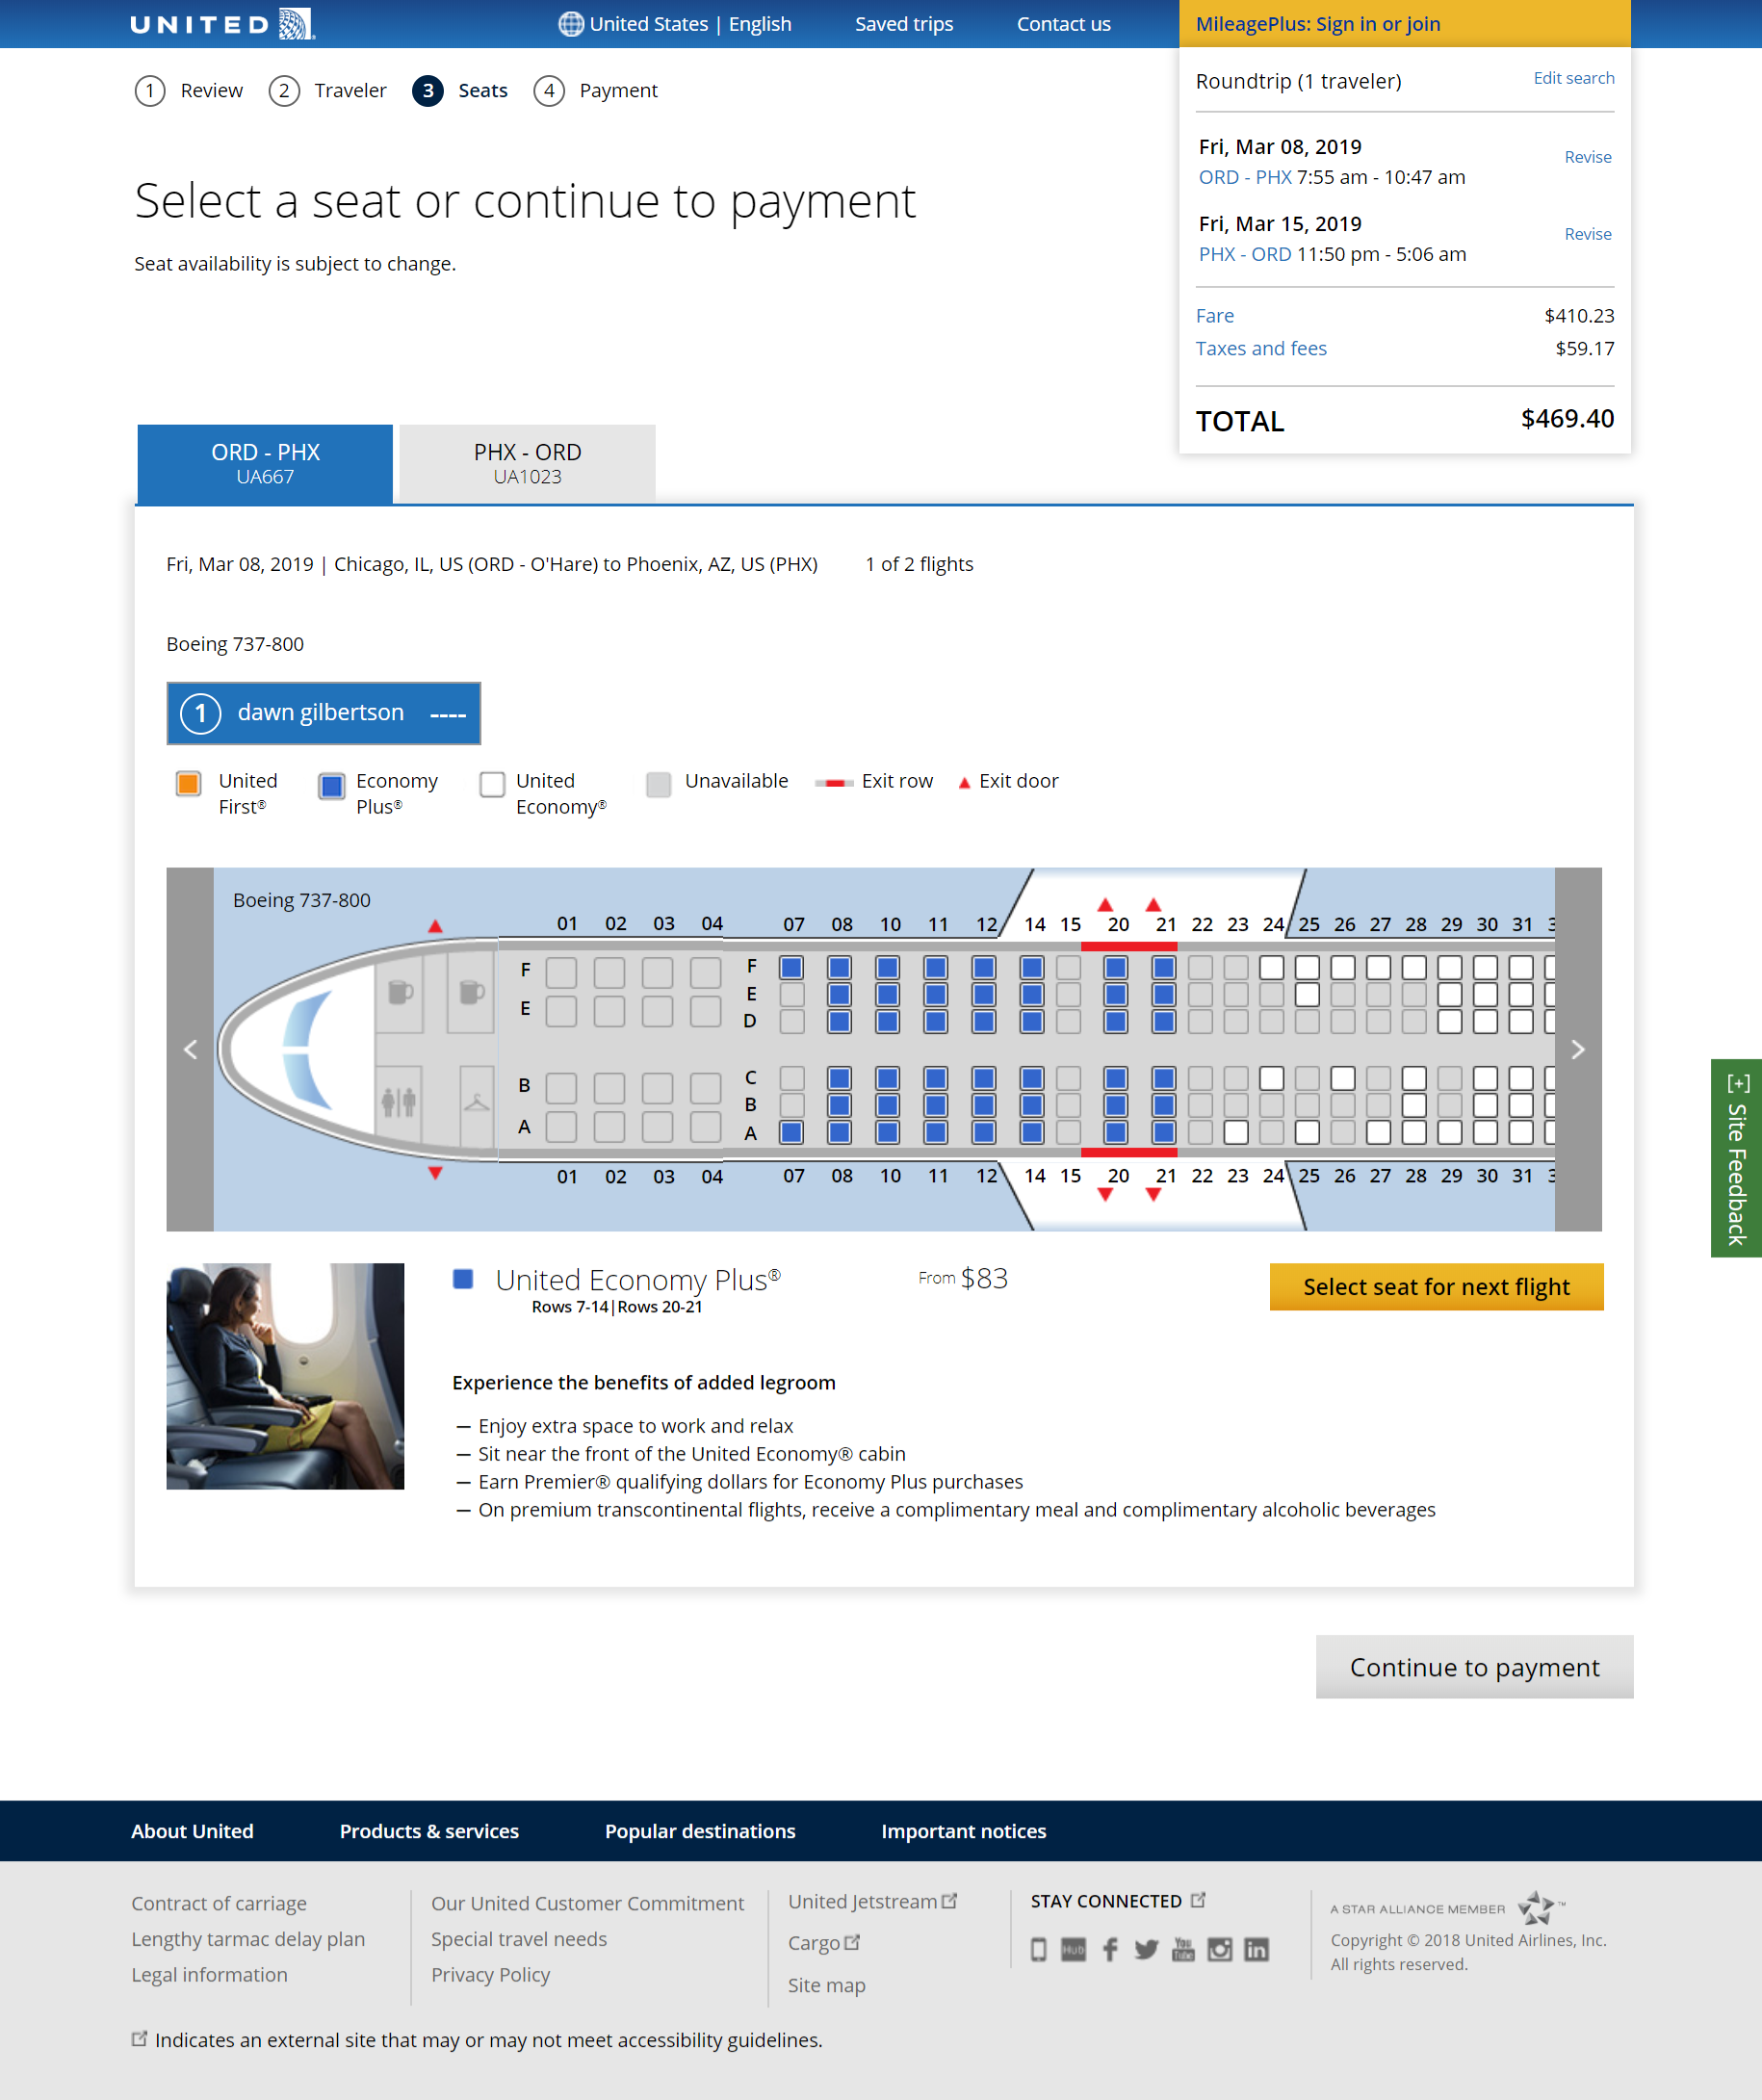 Delta Seating Chart By Flight Number